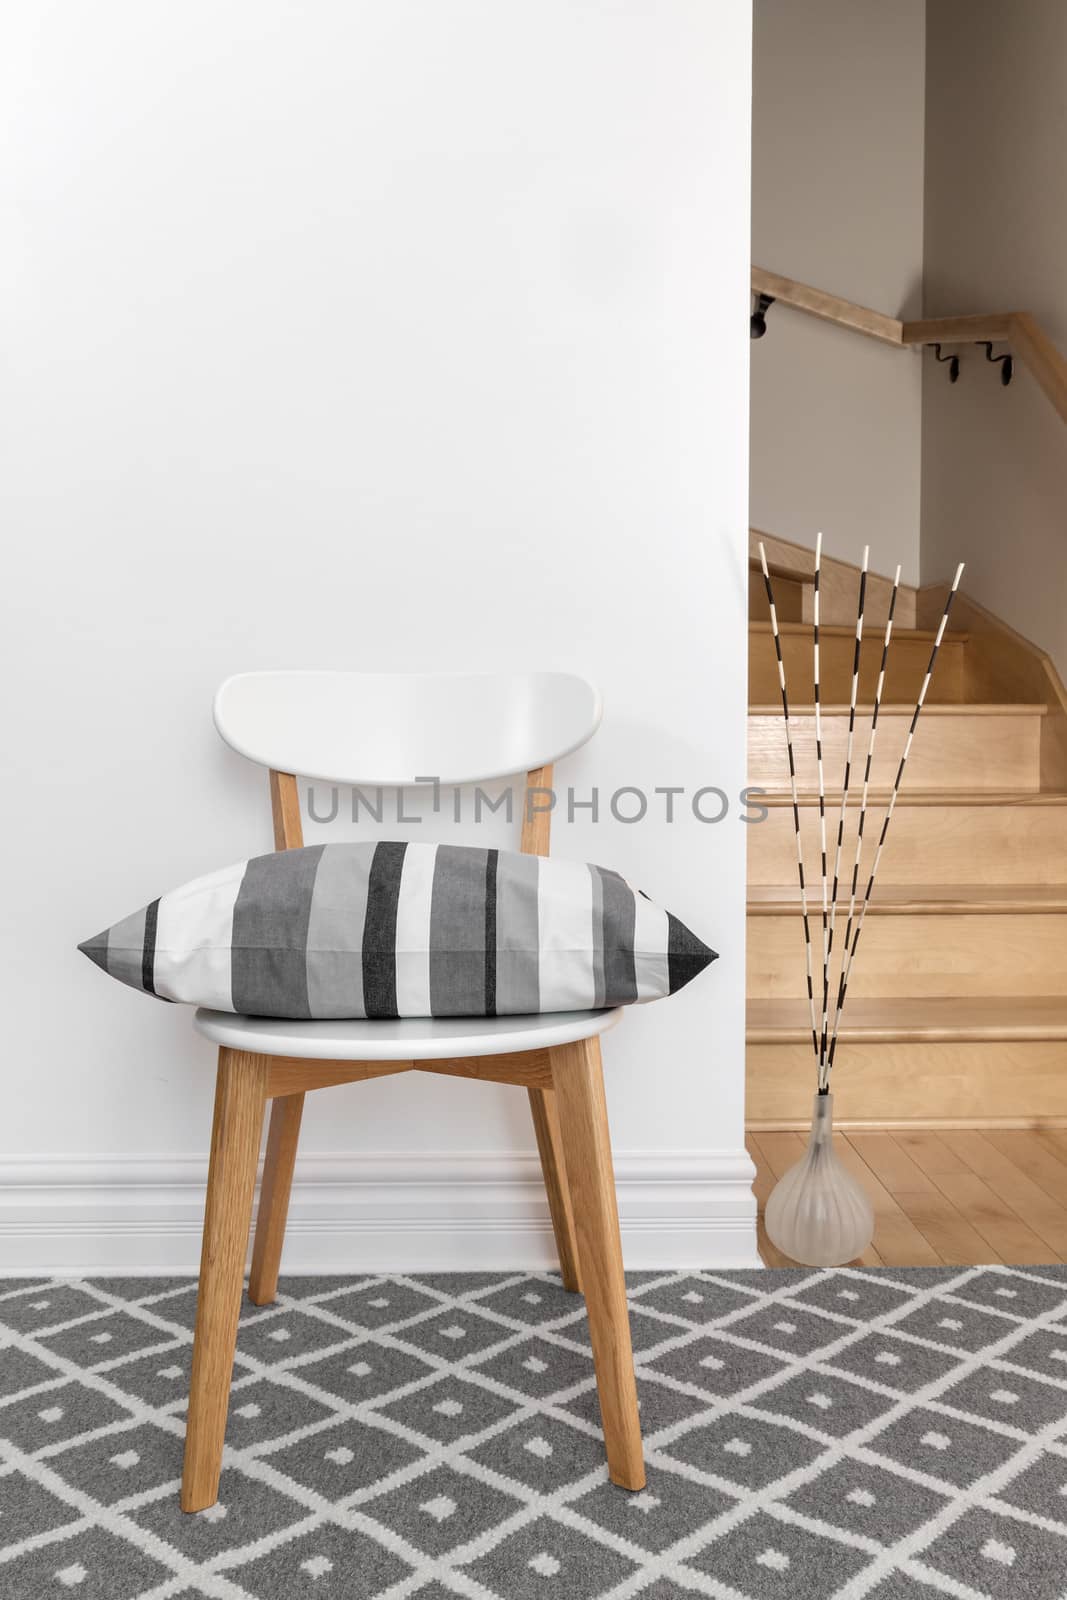 Chair decorated with gray striped cushion in a room with staircase.